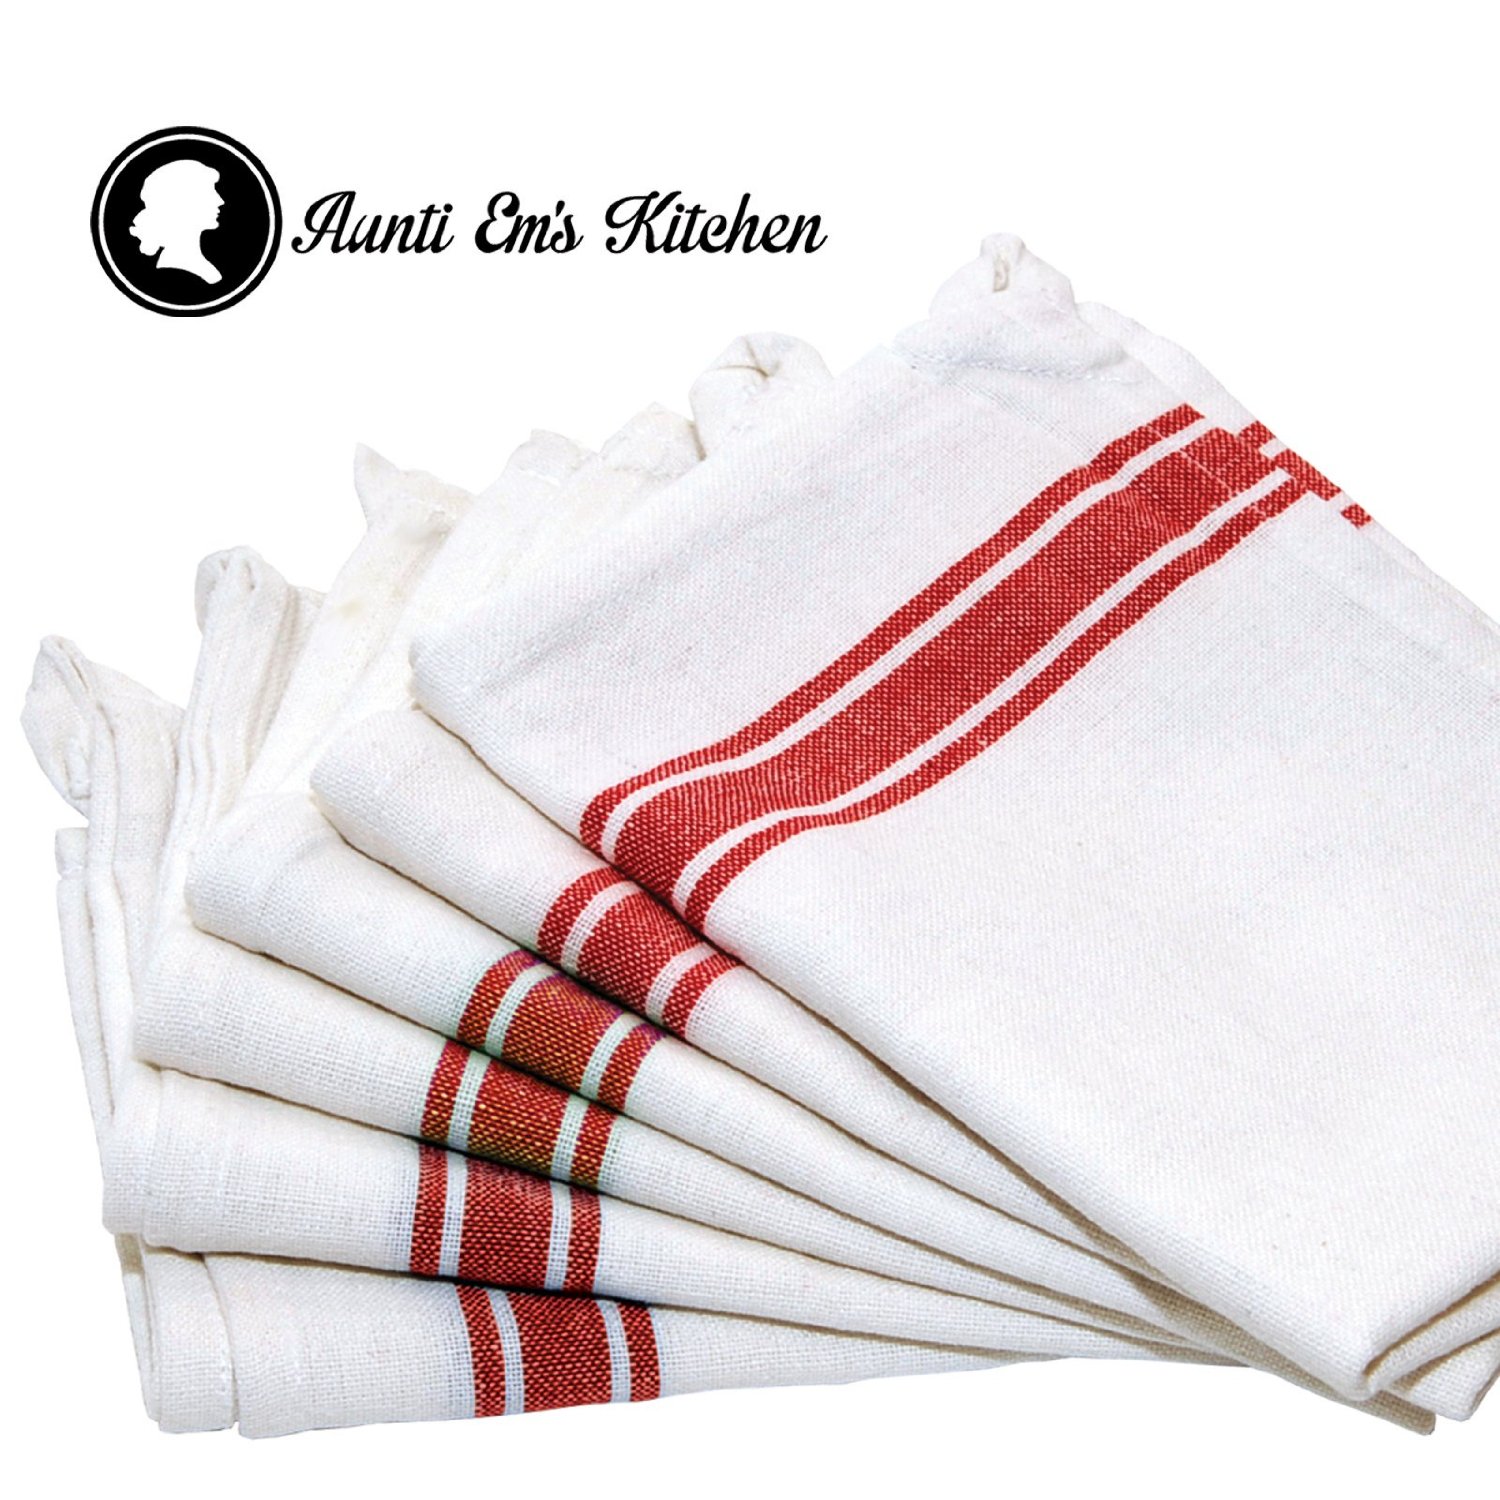 5 Best Cotton Kitchen Dish Towels - Dry your dishes while saving money